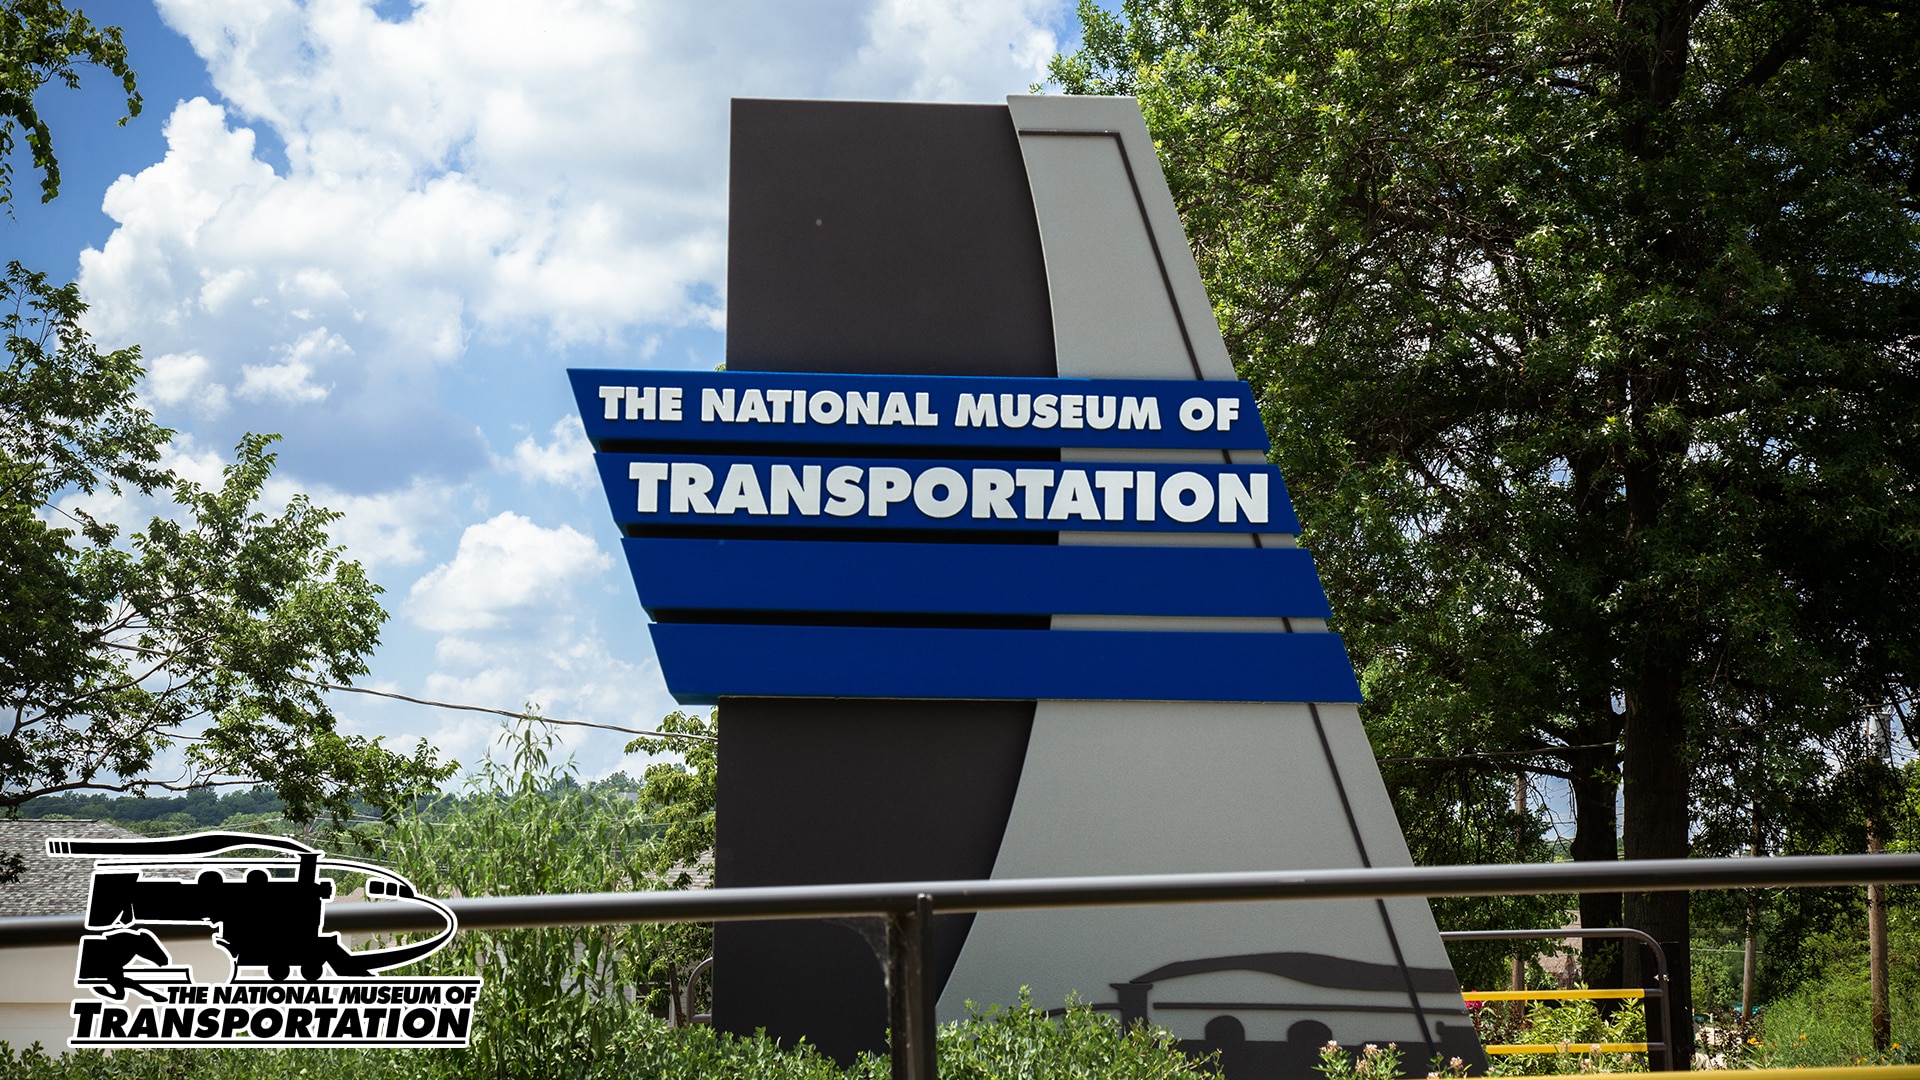 The National Museum of Transportation Nominated as BEST OPEN AIR MUSEUM by USA Today